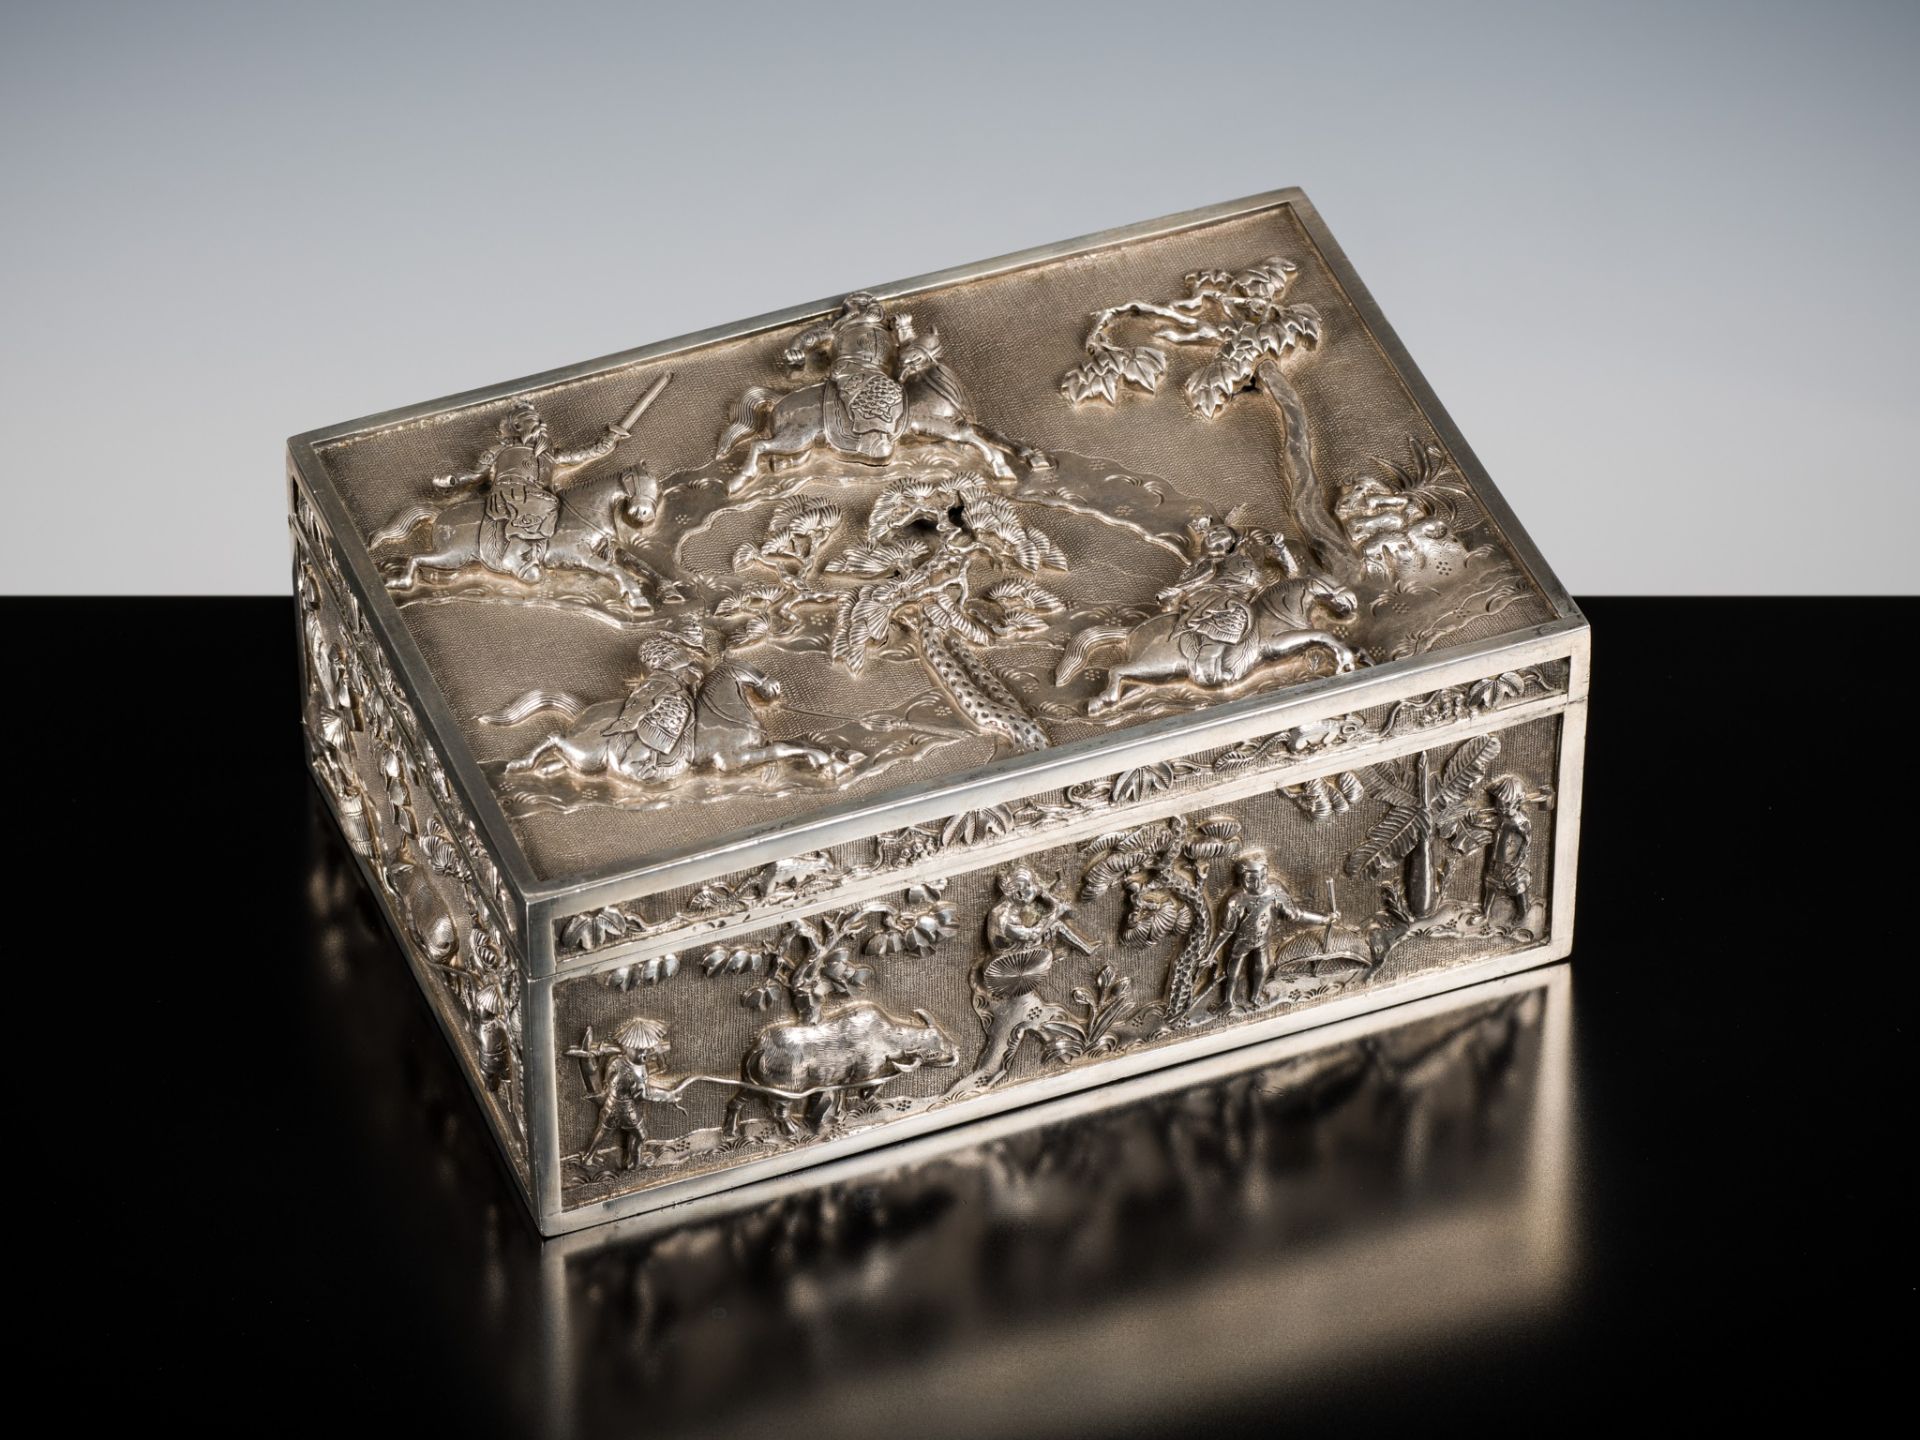 AN EXPORT SILVER REPOUSSE CIGAR BOX AND COVER, TONG YI MARK, LATE QING DYNASTY